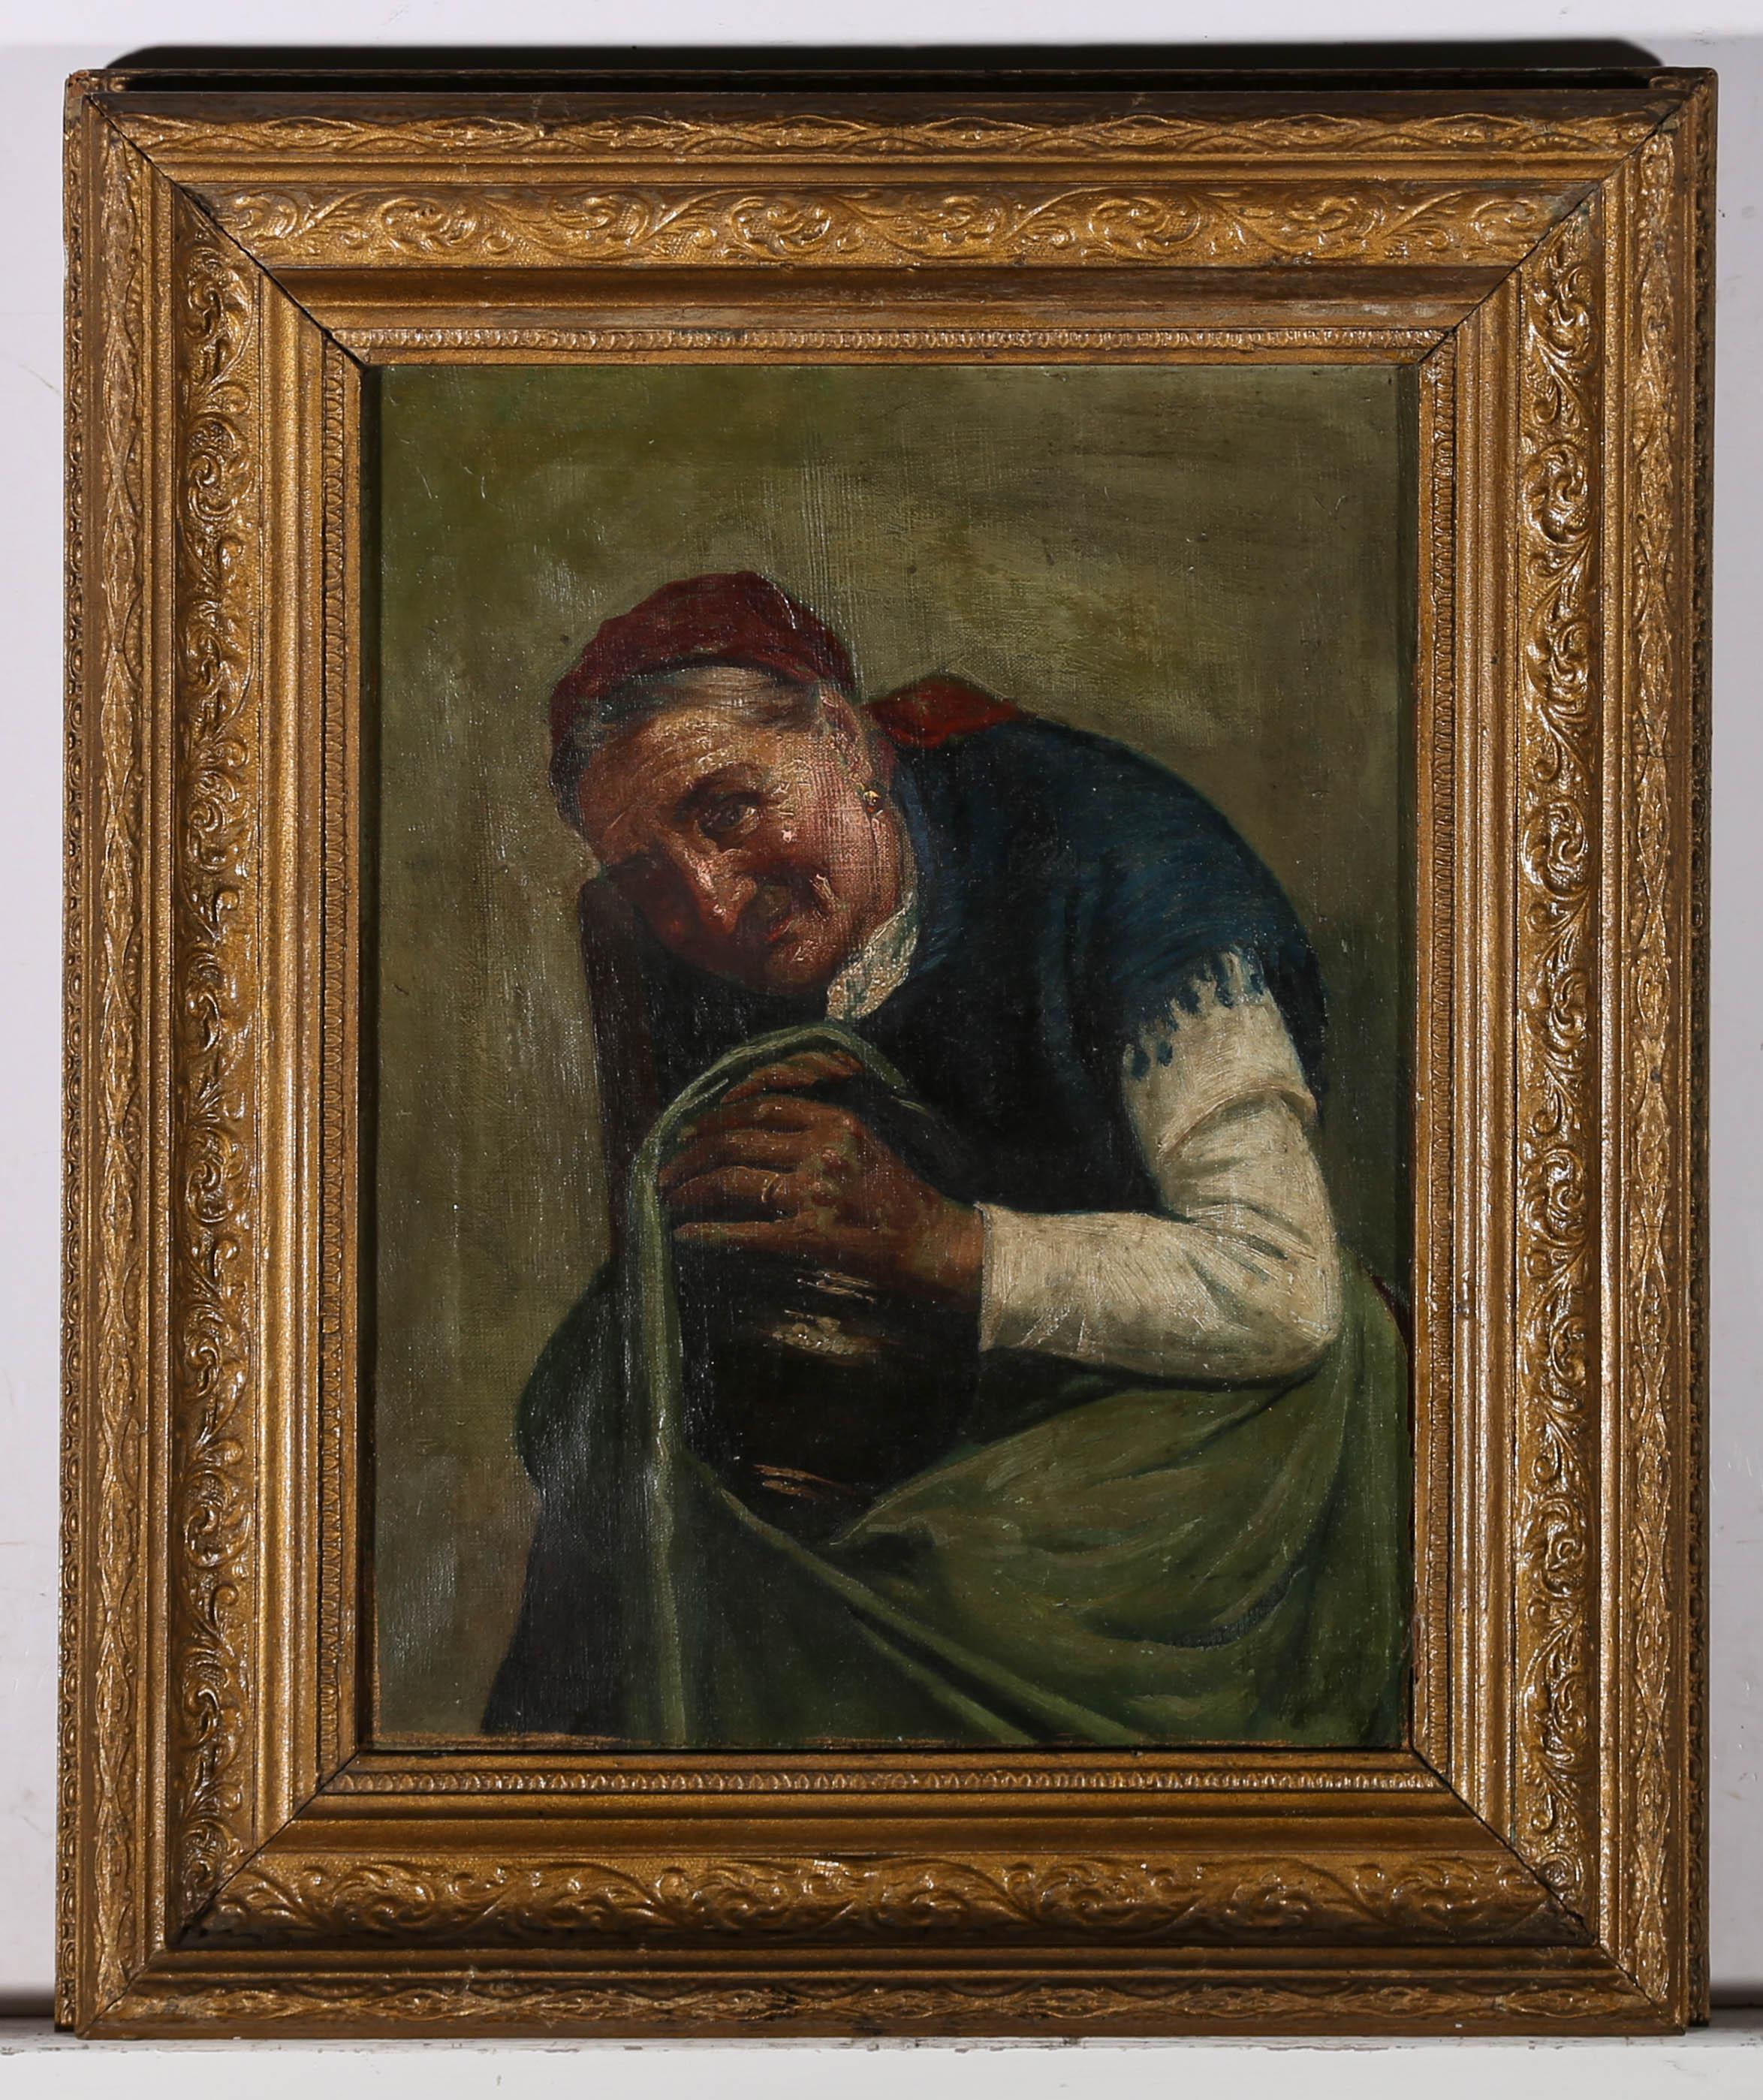 A charming portrait of an elderly Italian woman with a red headscarf and blue shawl, holding an earthenware pot, wrapped in her green apron. The painting has been presented in a late 19th Century gilt frame with scrolling low relief acanthus leaf